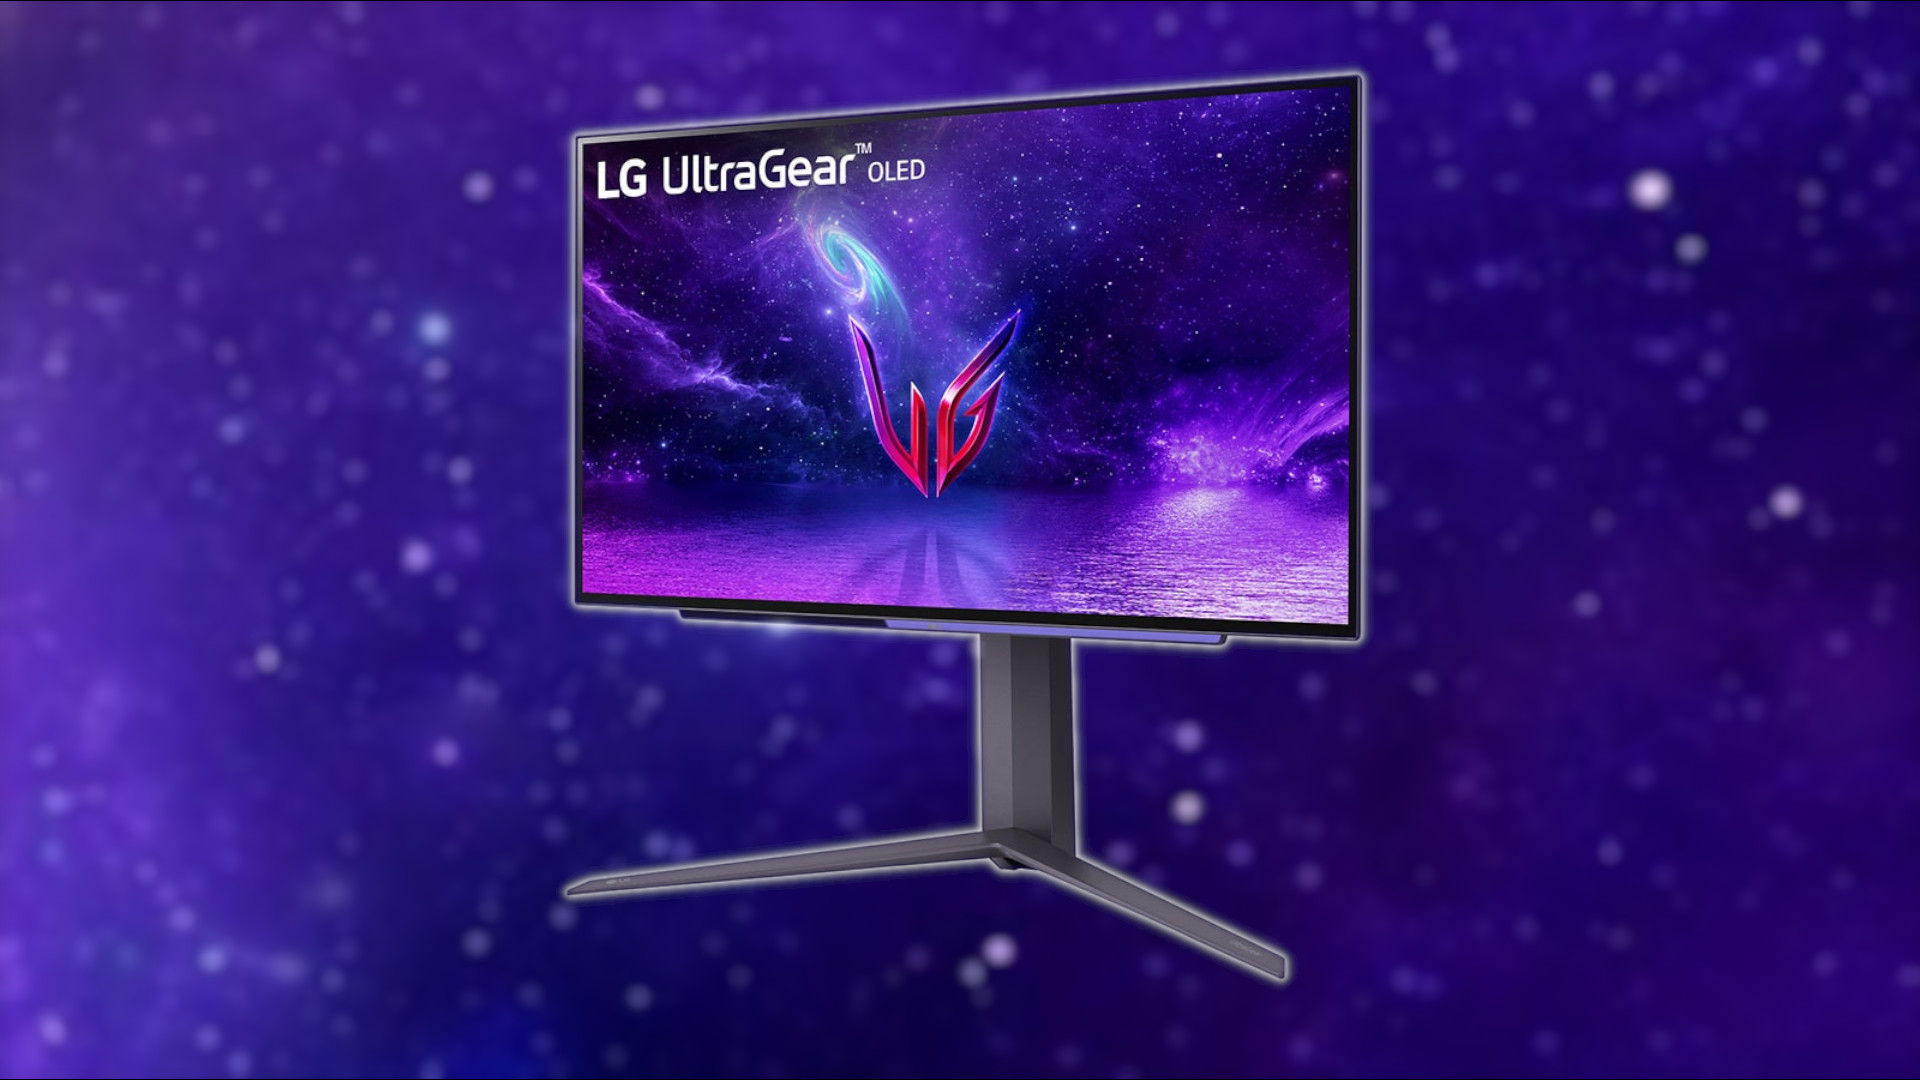 LG OLED gaming monitor teased, features 240Hz refresh rate